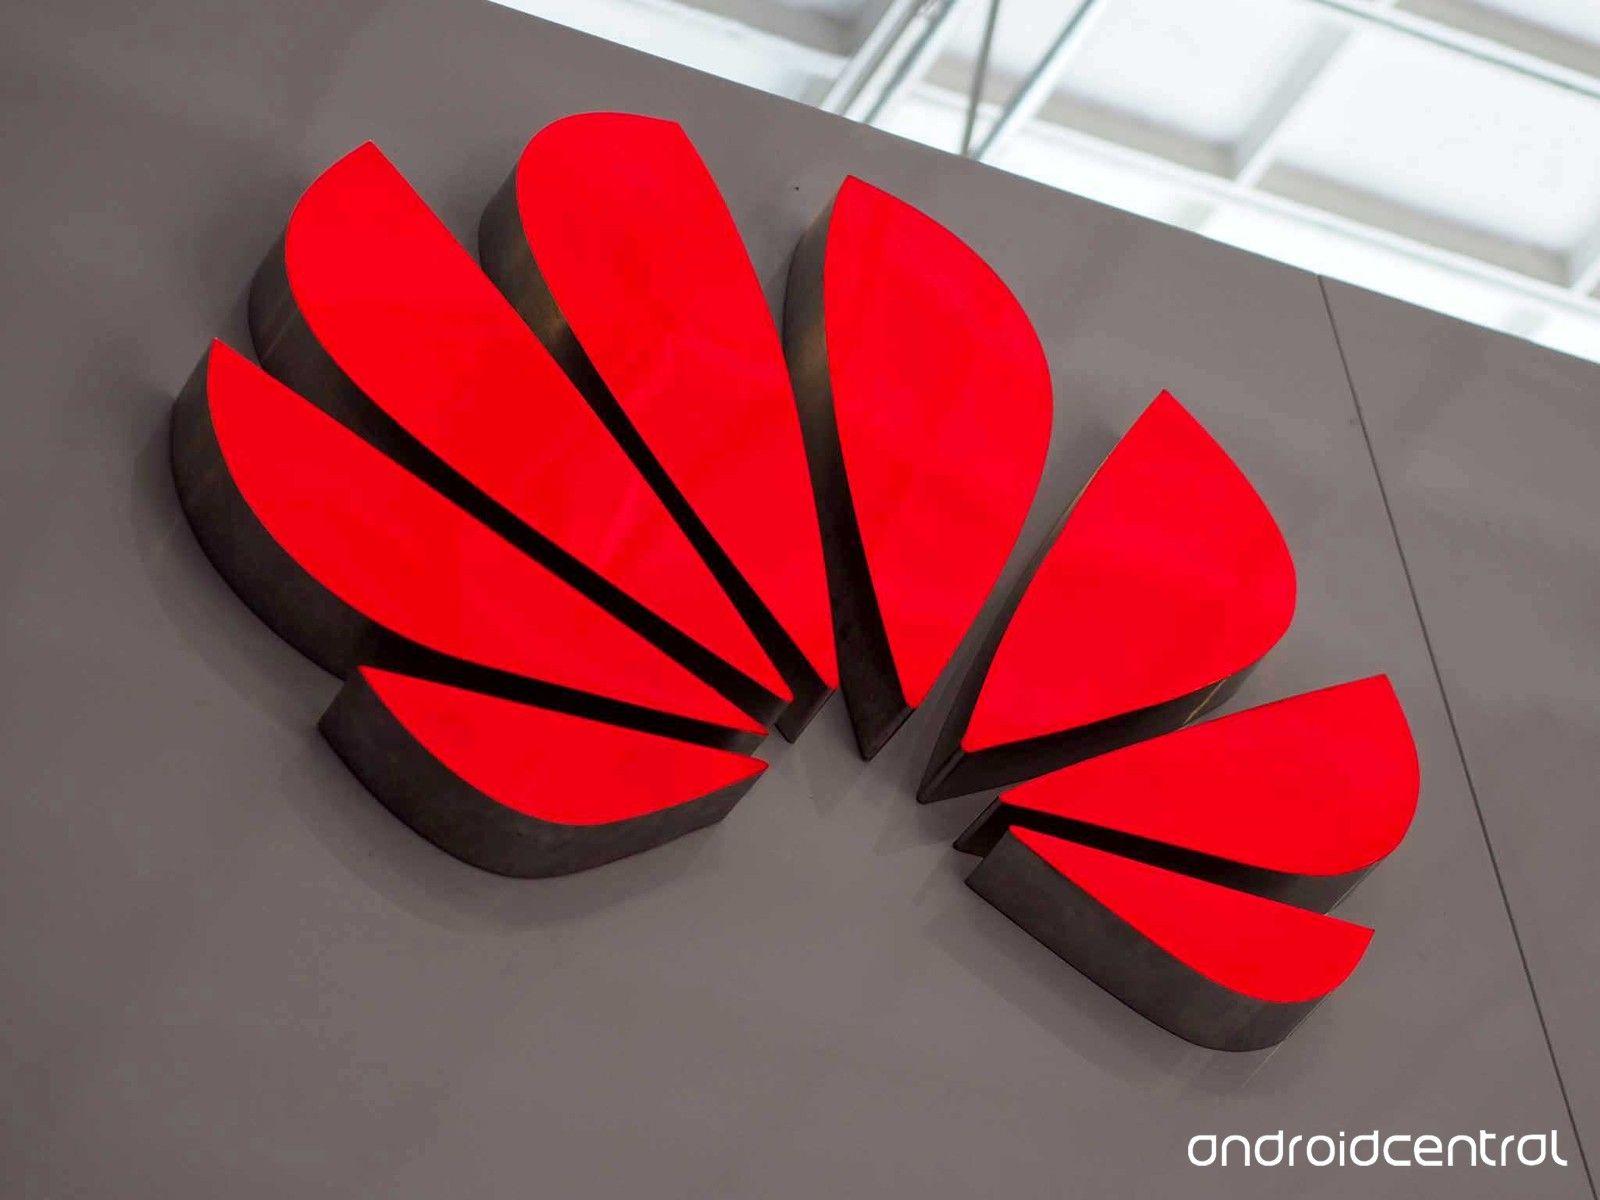 New Huawei Logo - Smartphone nerds, it's time to start getting excited about Huawei